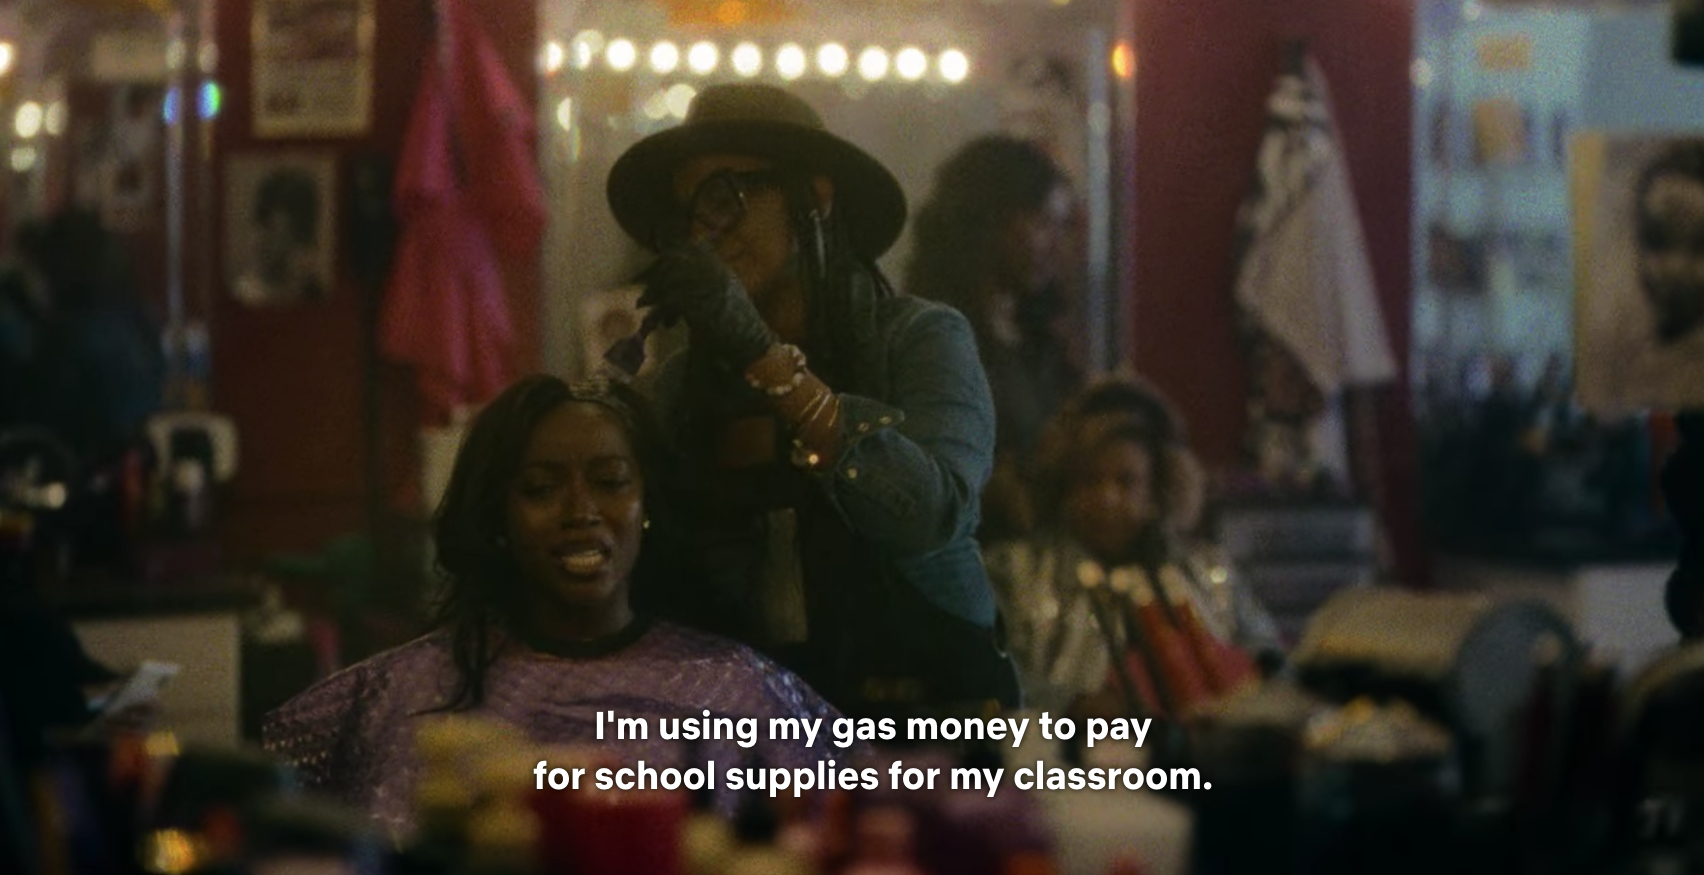 A woman getting her hair done as she talks about using gas money to pay for school supplies